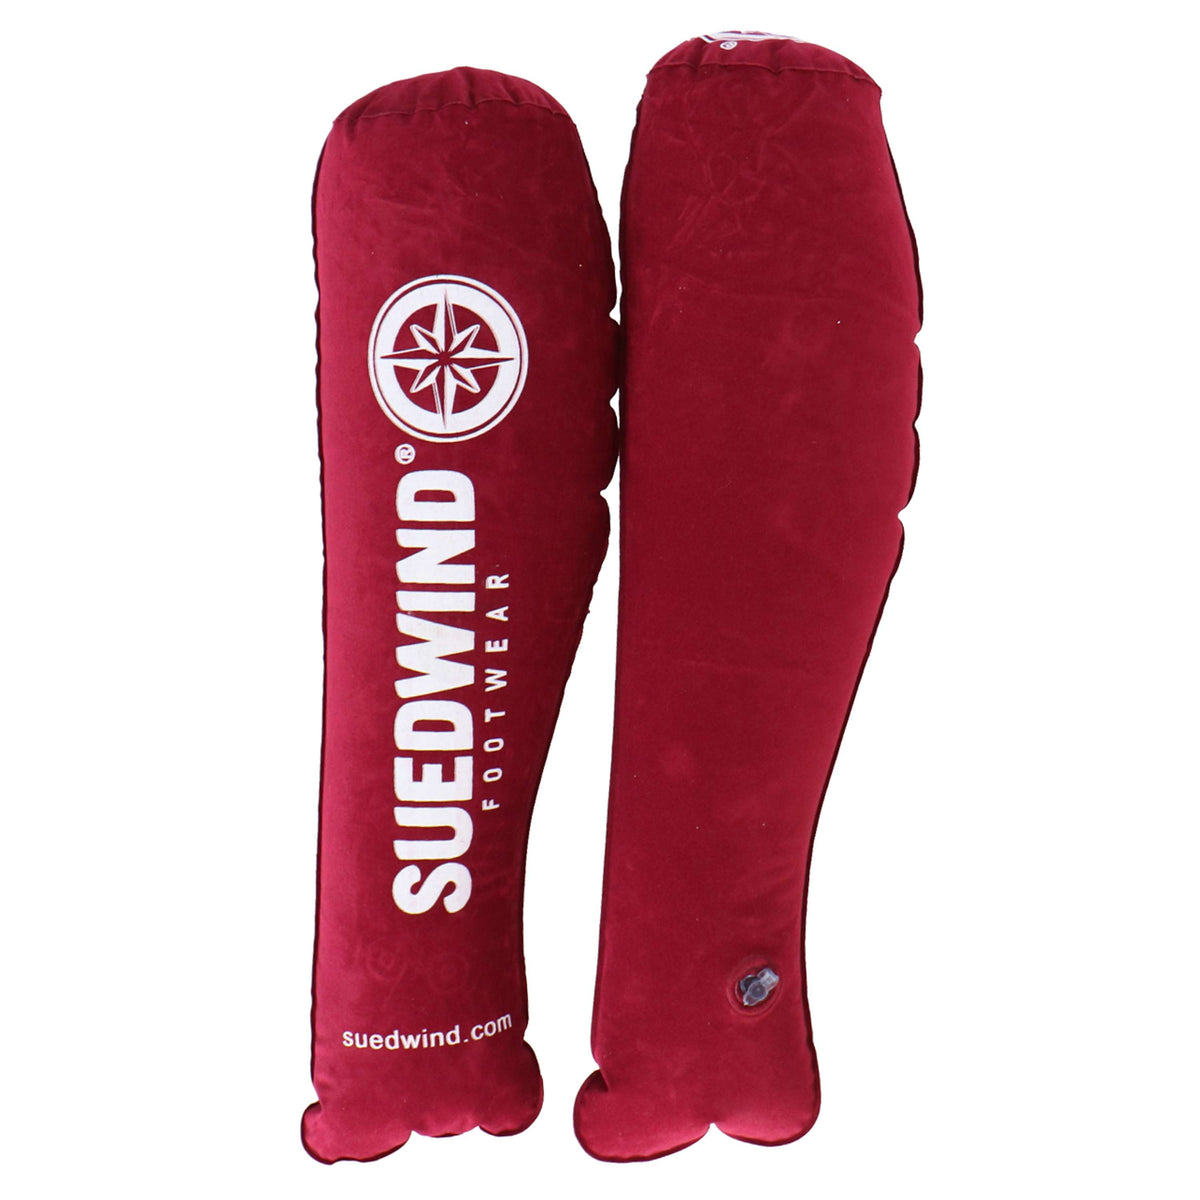 Suedwind Stiefelspanner Inflatable Rot